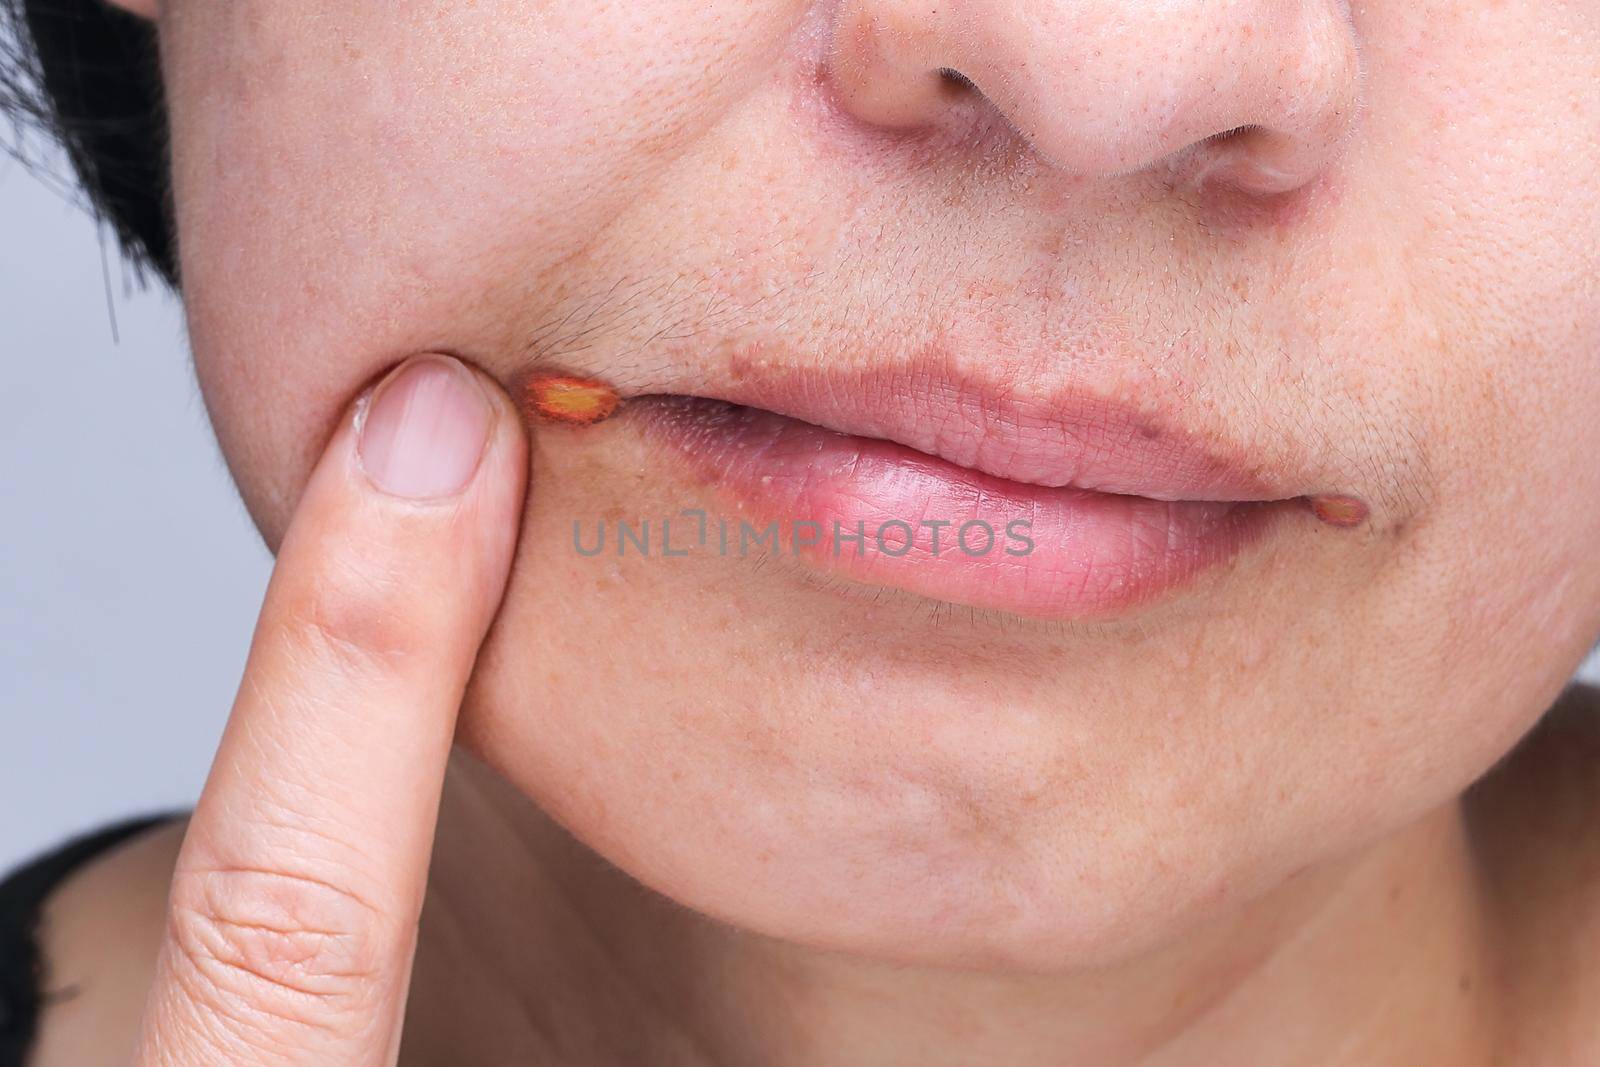 Angular cheilitis is a type of common inflammation of the lips